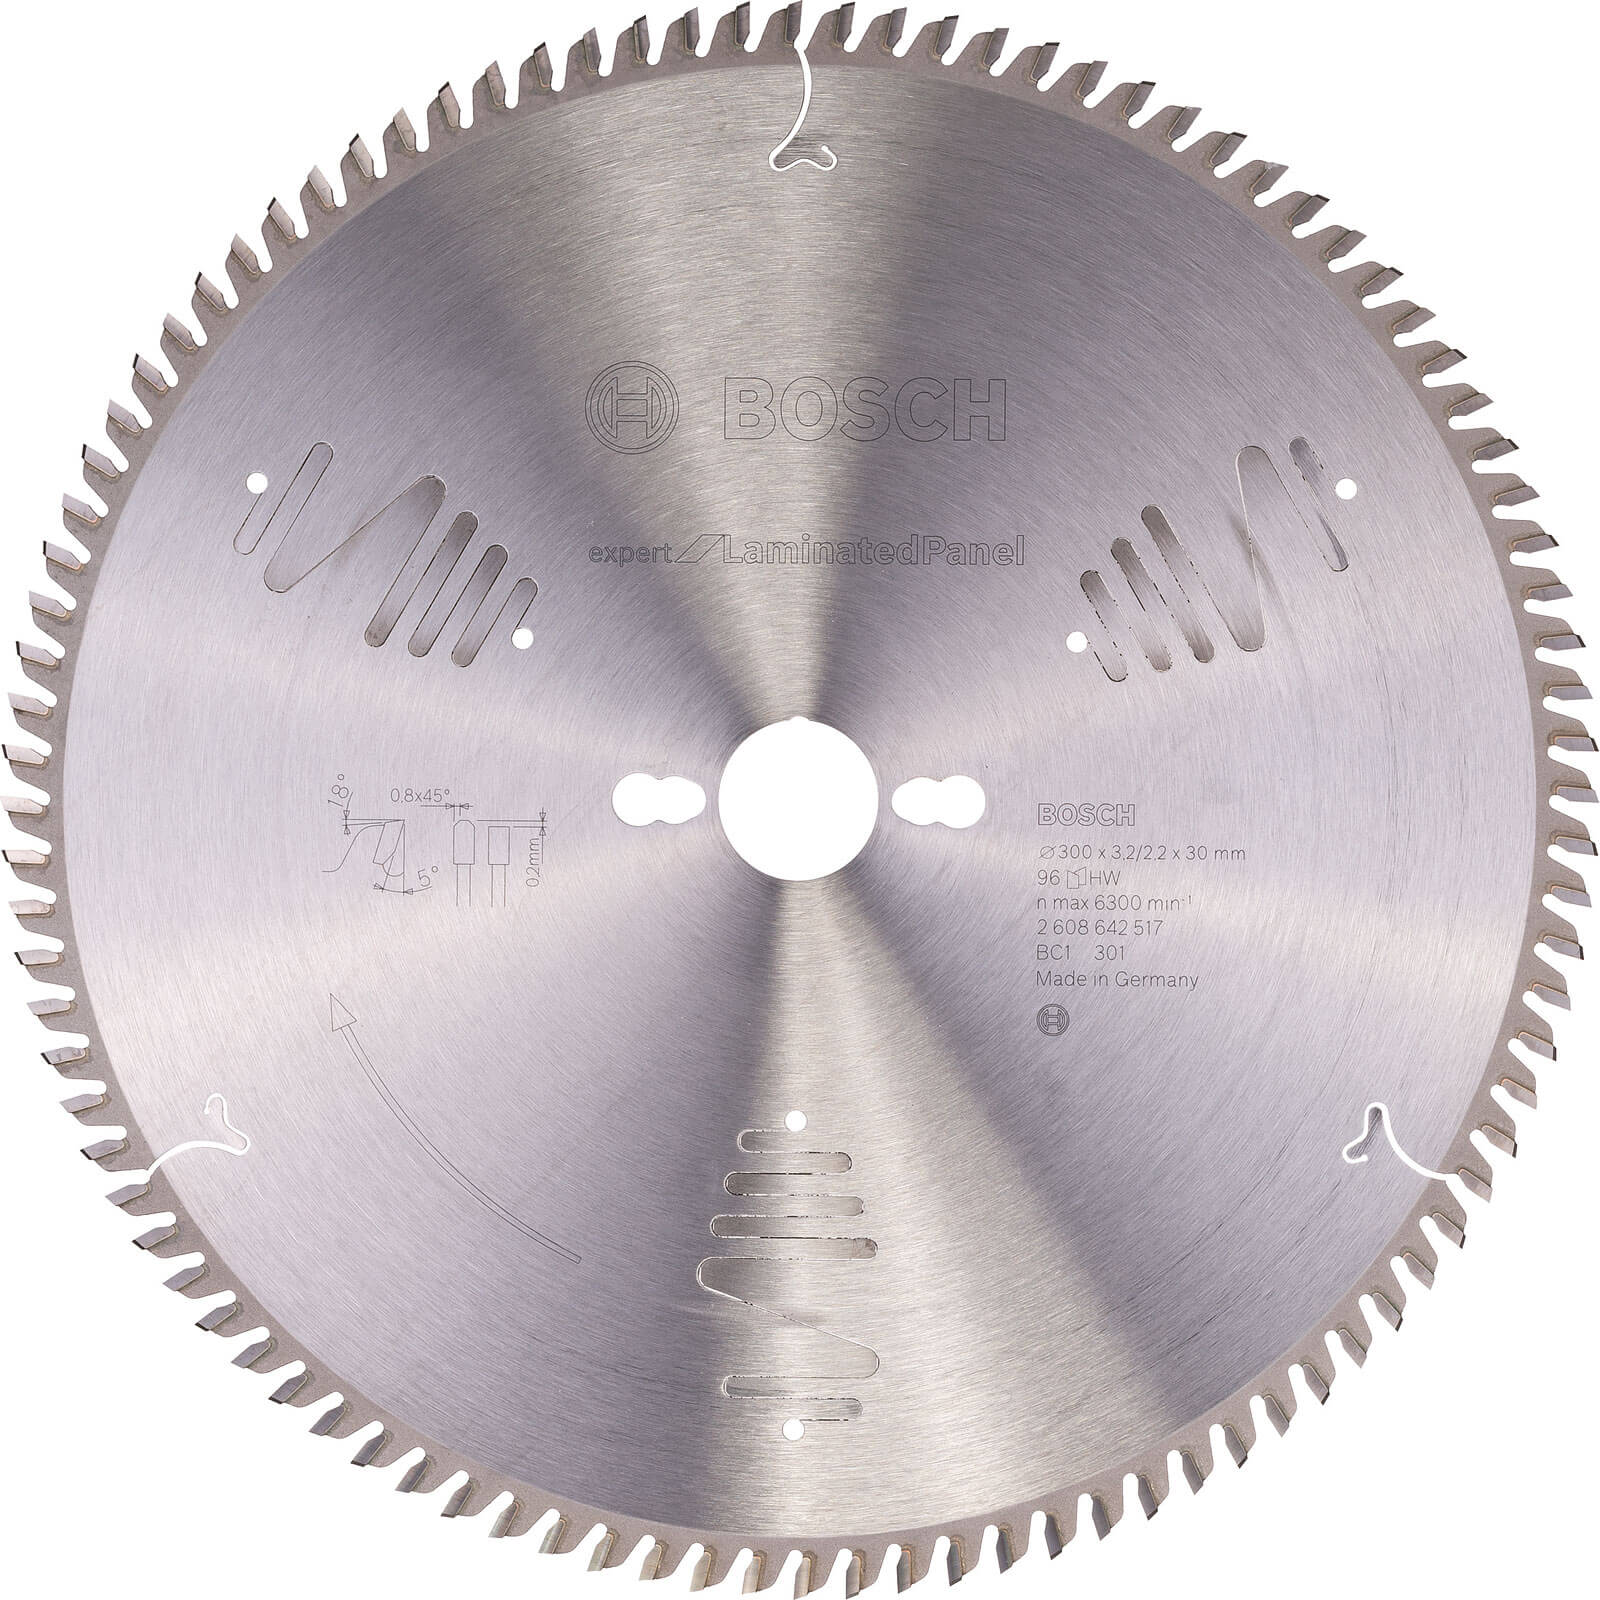 Bosch Expert Fine Cut Table Saw Blade for Laminated Panel 300mm 96T 30mm